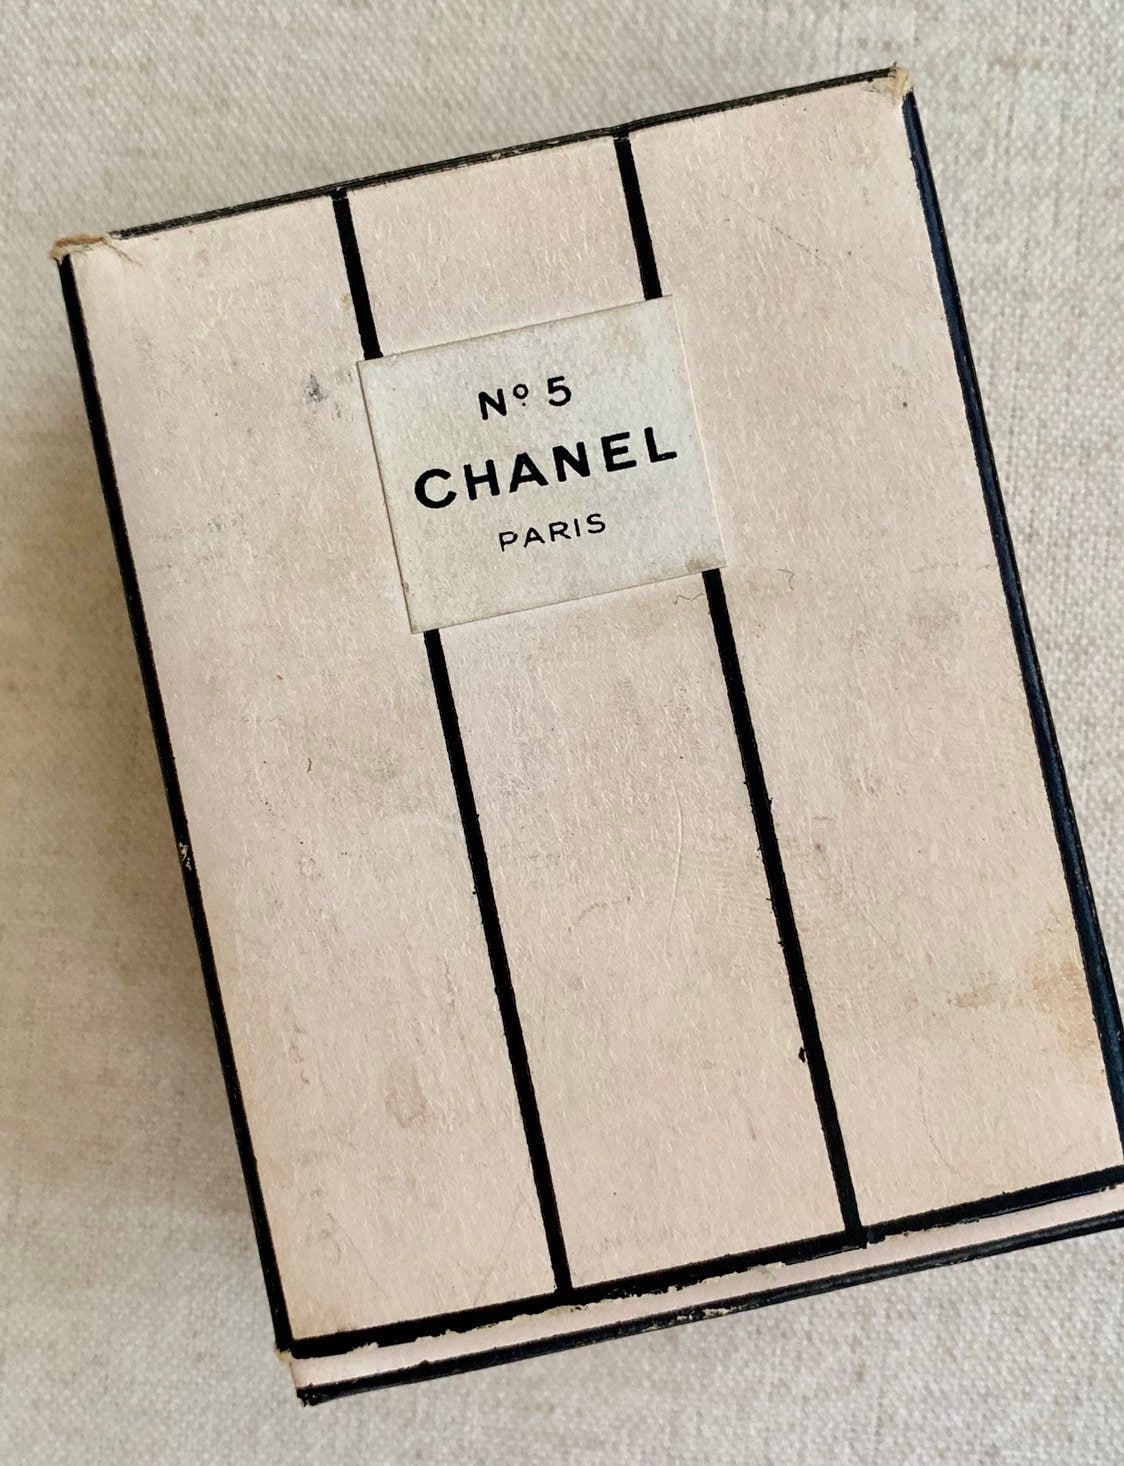 Chanel No 5 Perfume with Rare Original Box Packaging Vintage Old Full